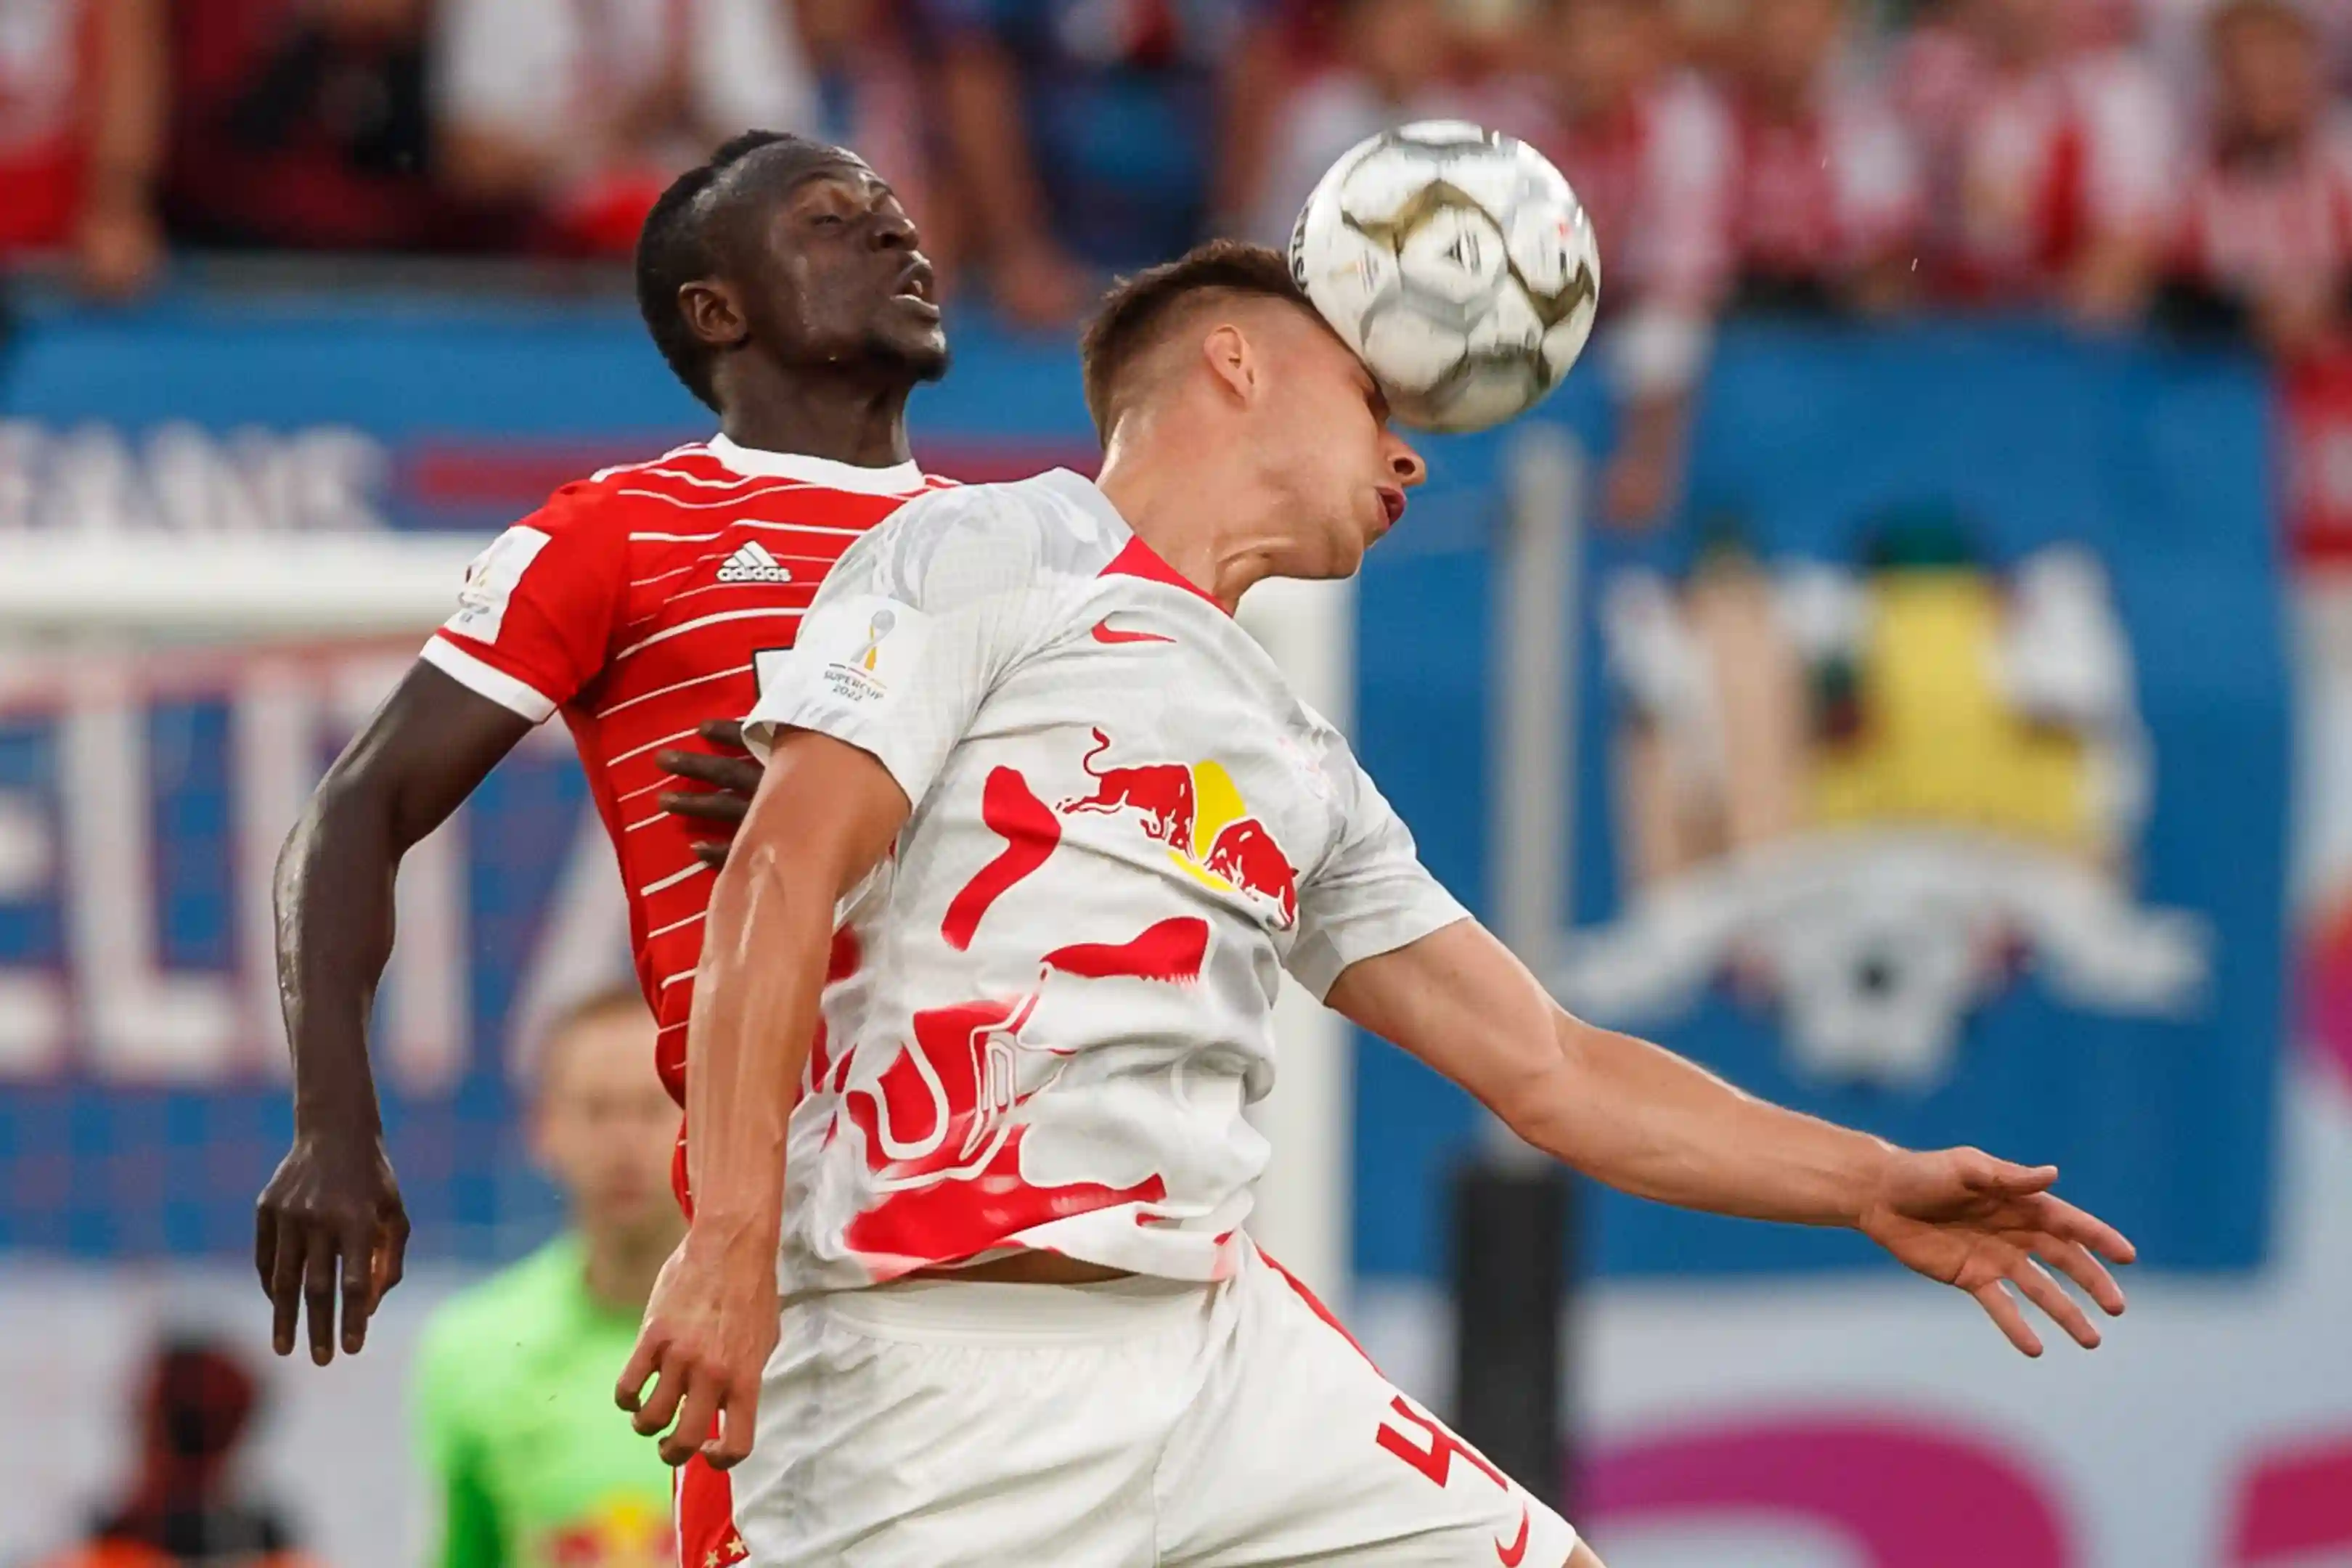 sadio mane and David Lelle fighting for an air ball during bayern munich and rb leipzig game